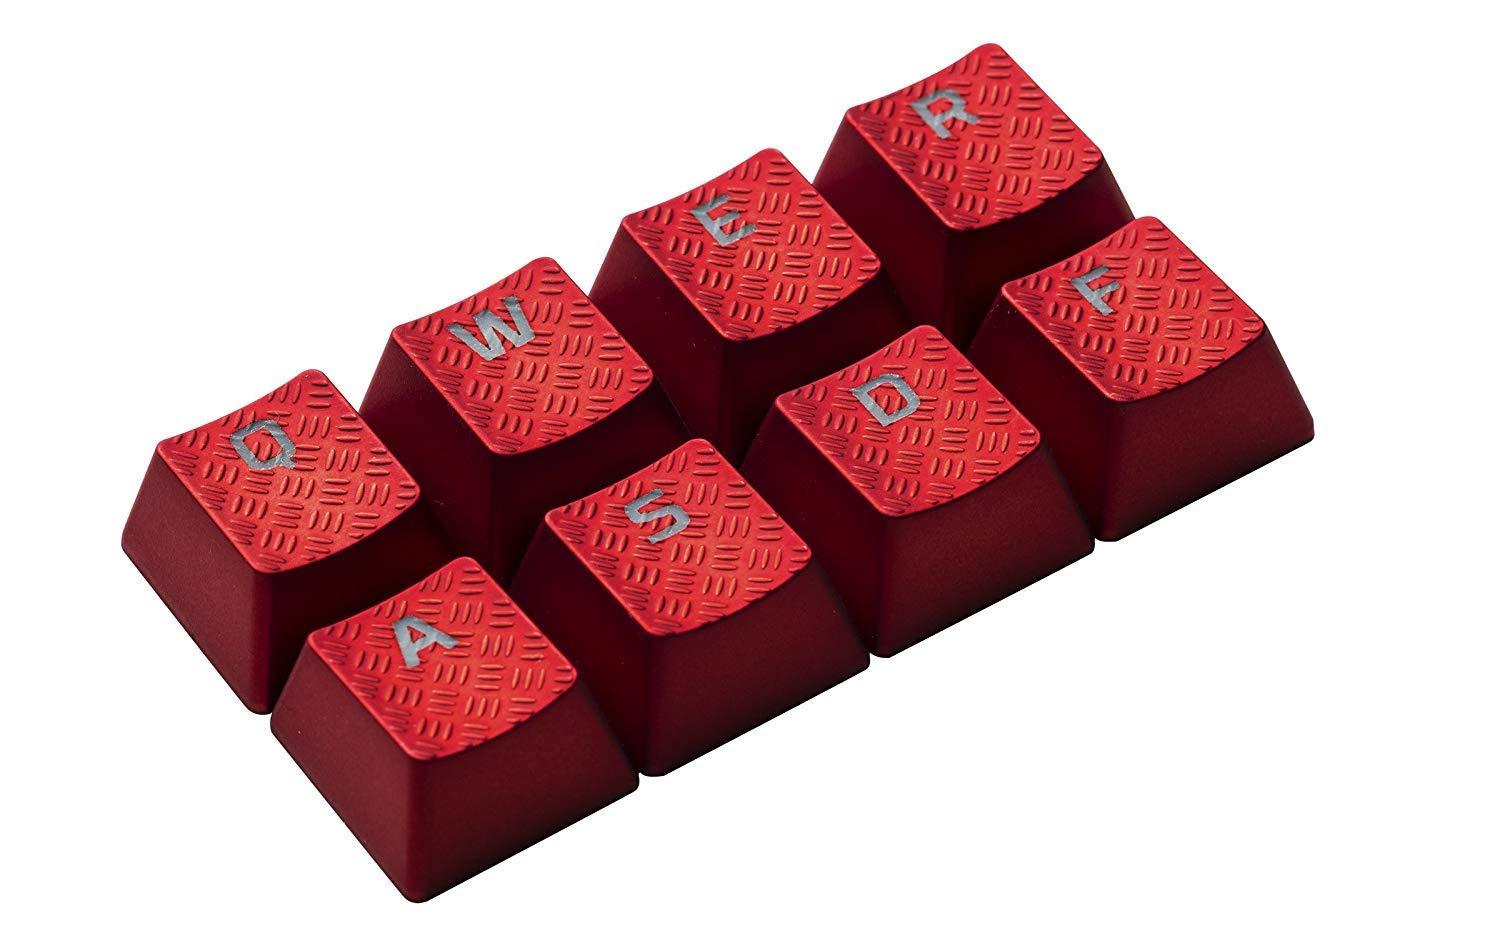 HyperX FPS Keycaps - Red - Store 974 | ستور ٩٧٤